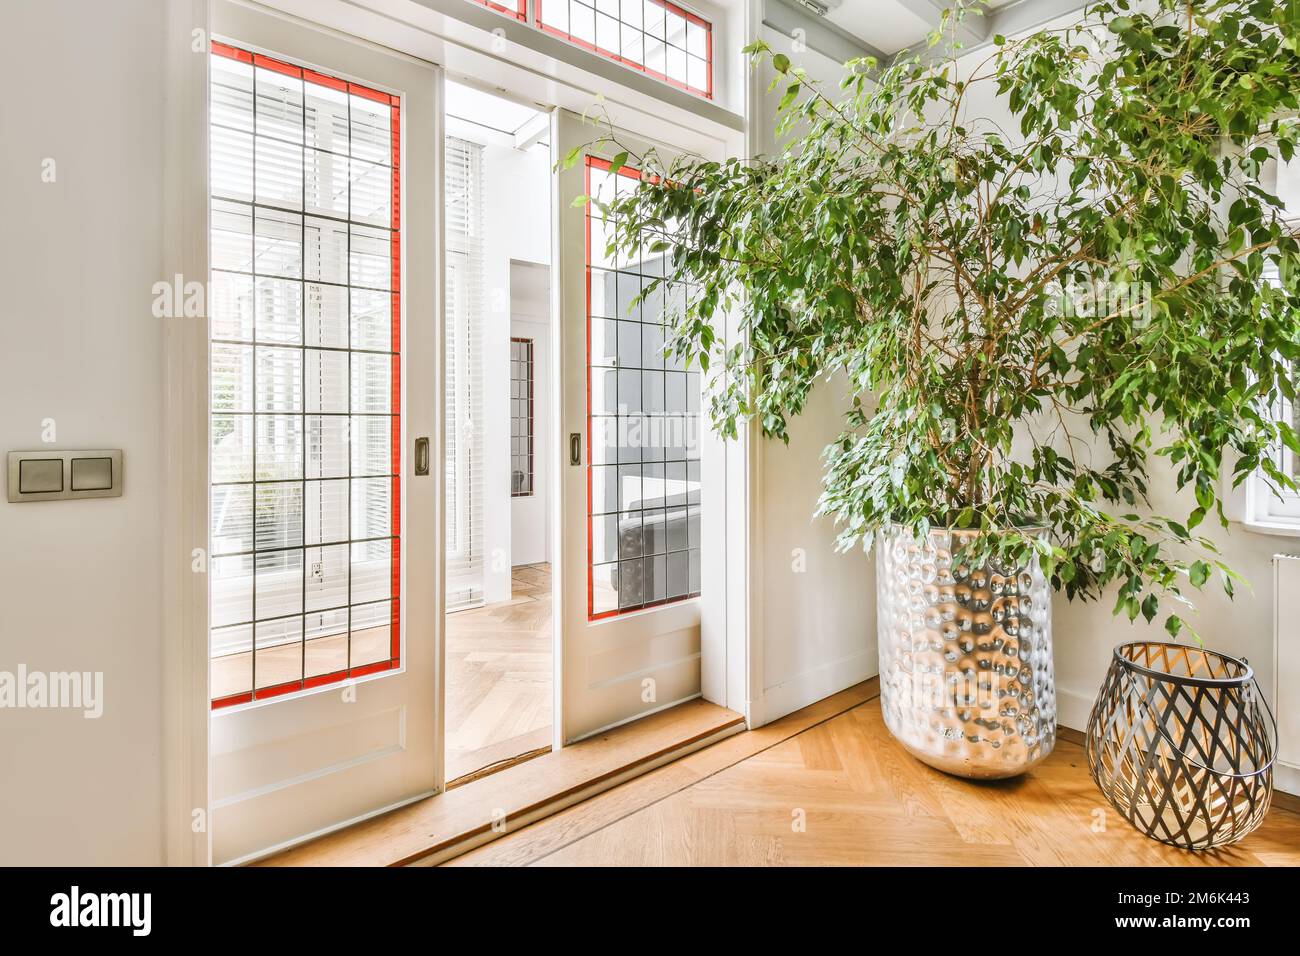 a plant in a vase next to a white door with red trim on the glass and side paneled windows Stock Photo